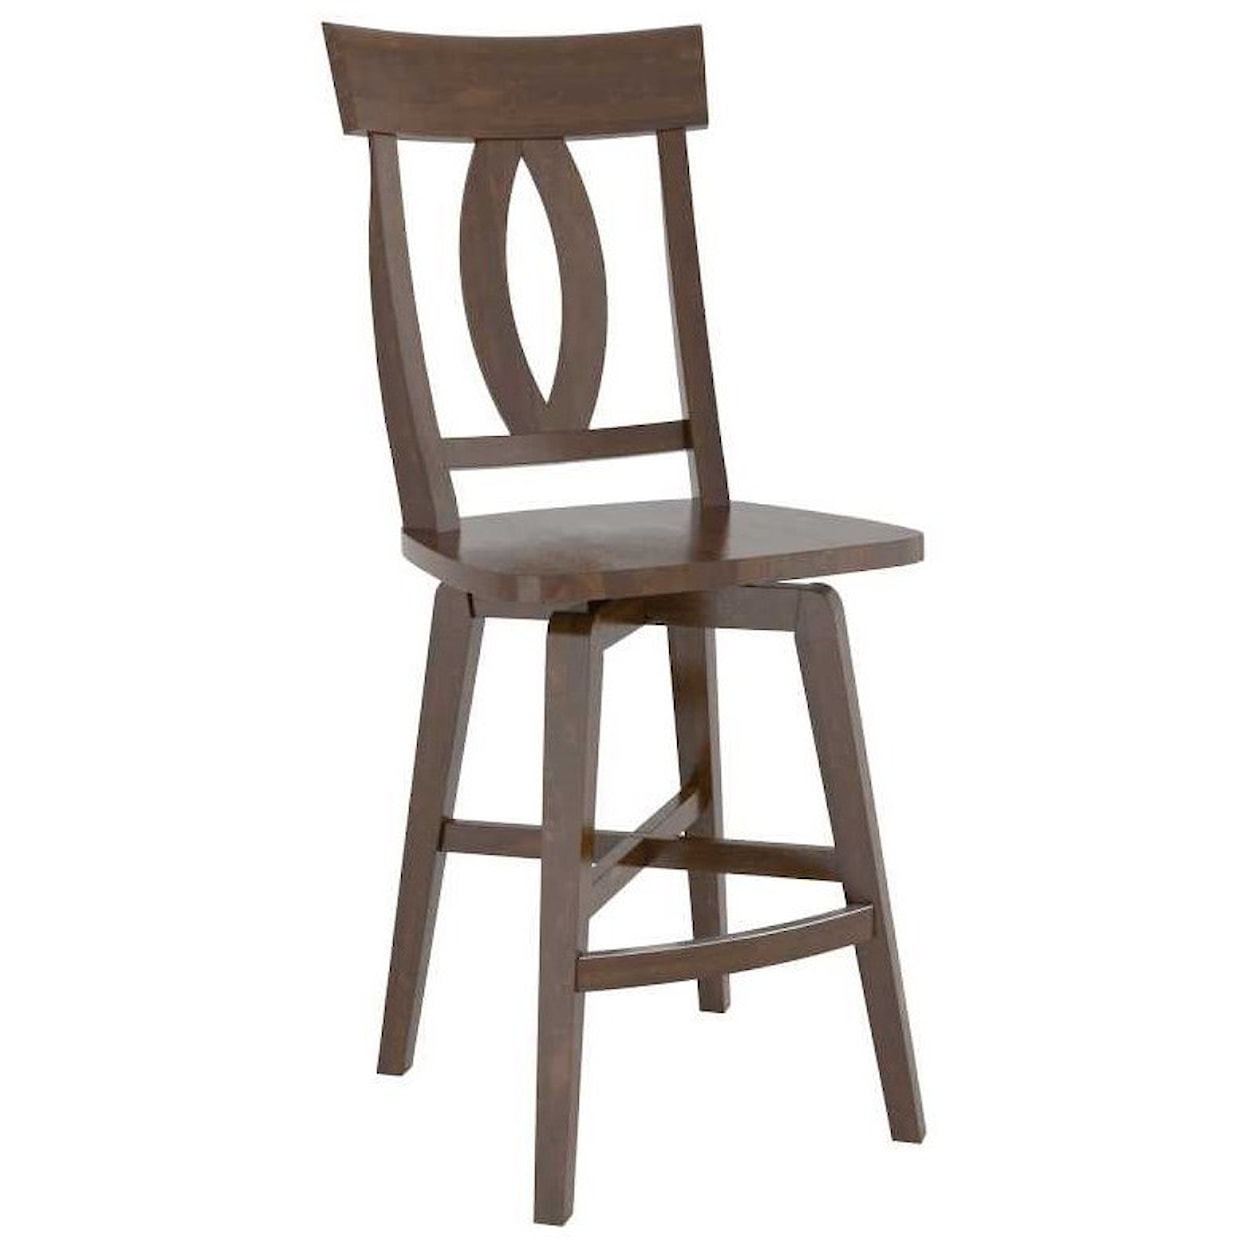 Canadel Canadel Customizable Fixed Counter Stool